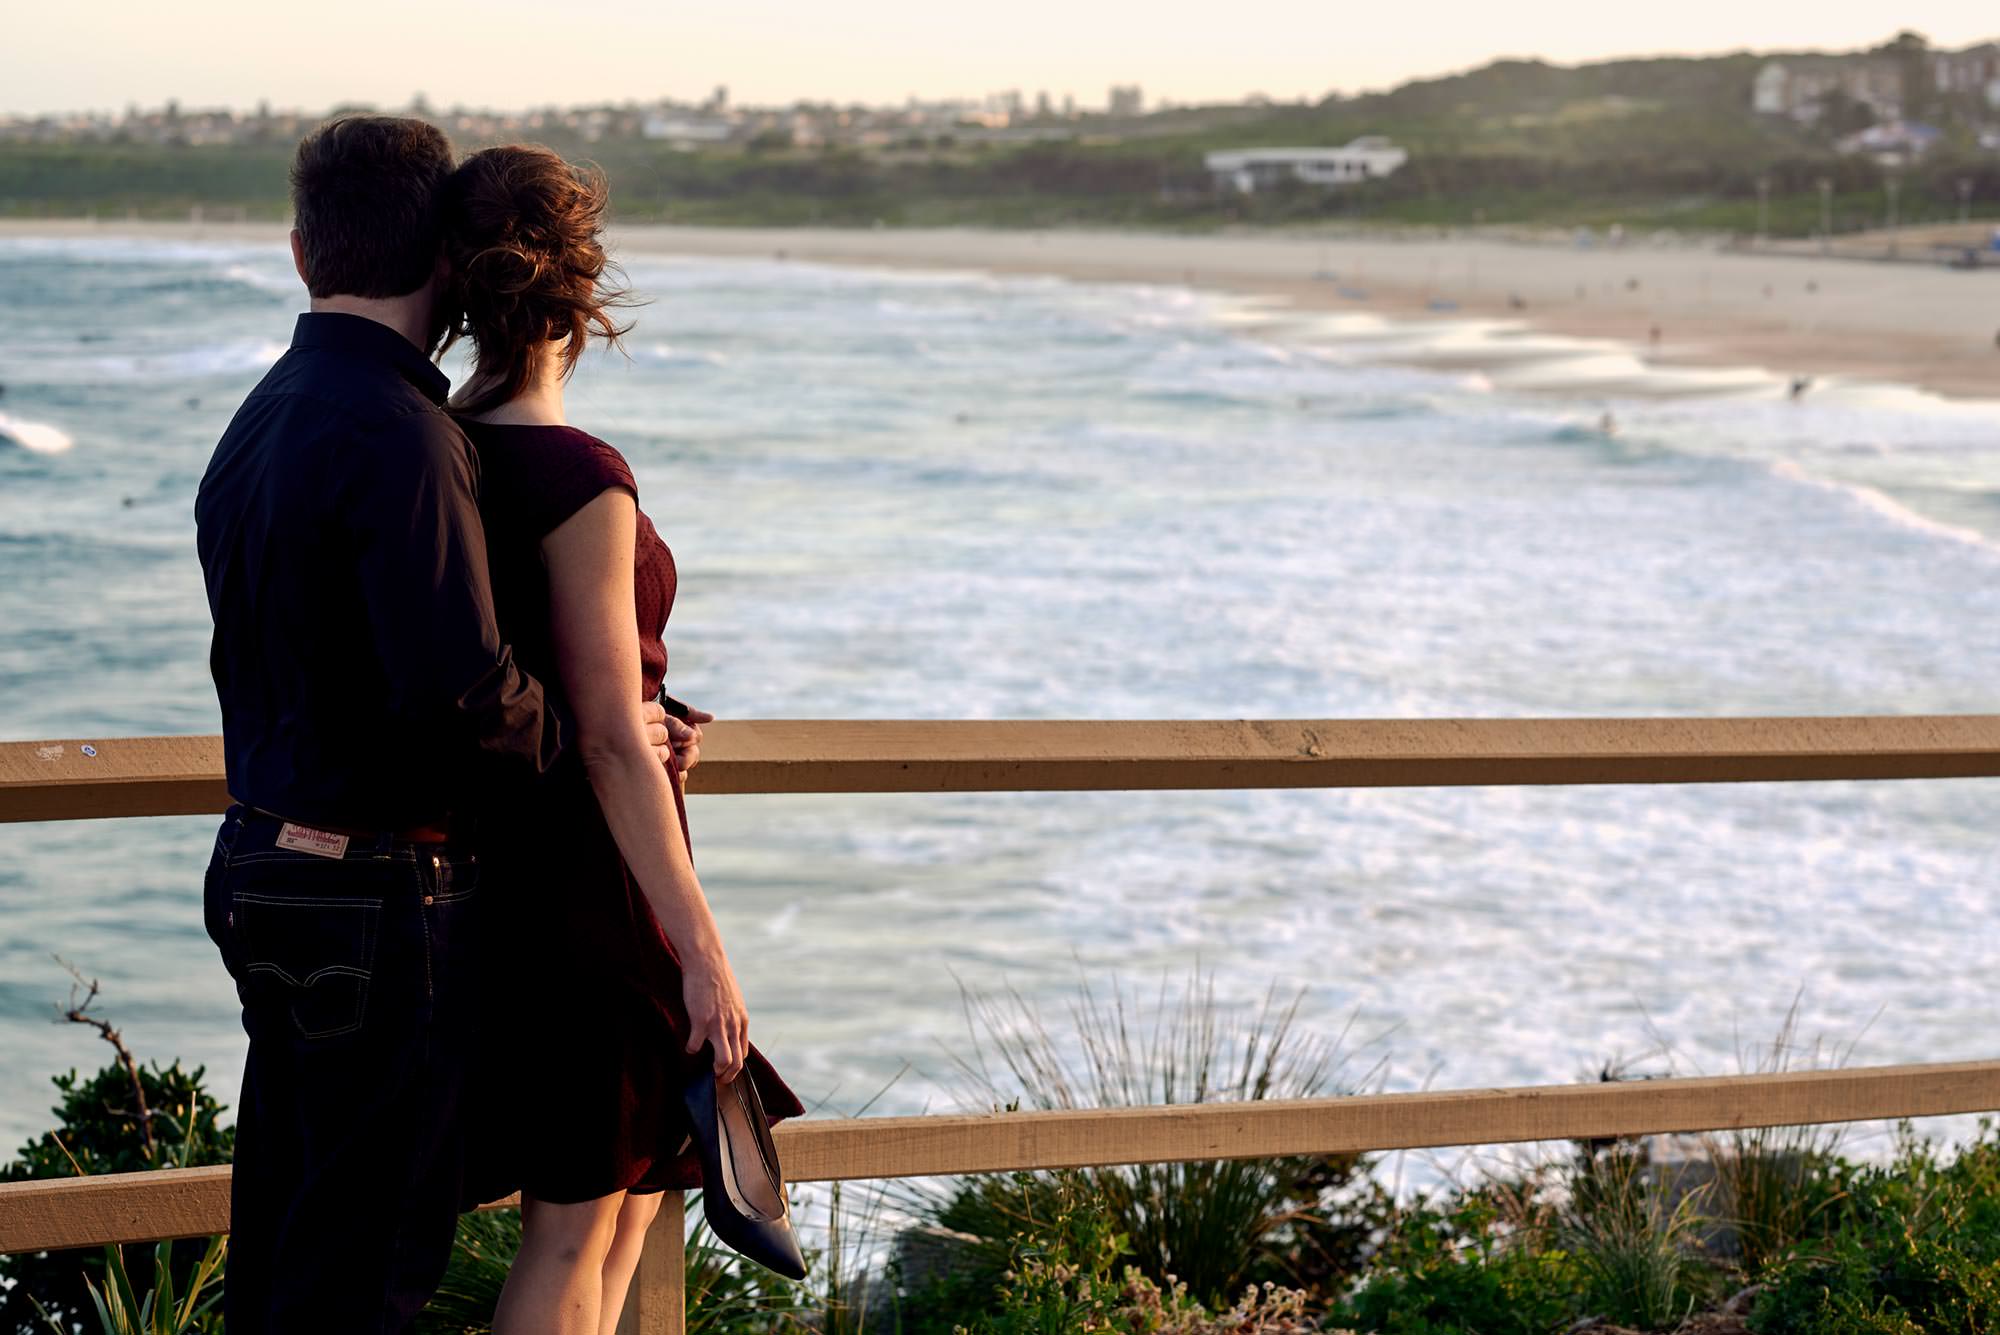 Looking out over Maroubra Beach